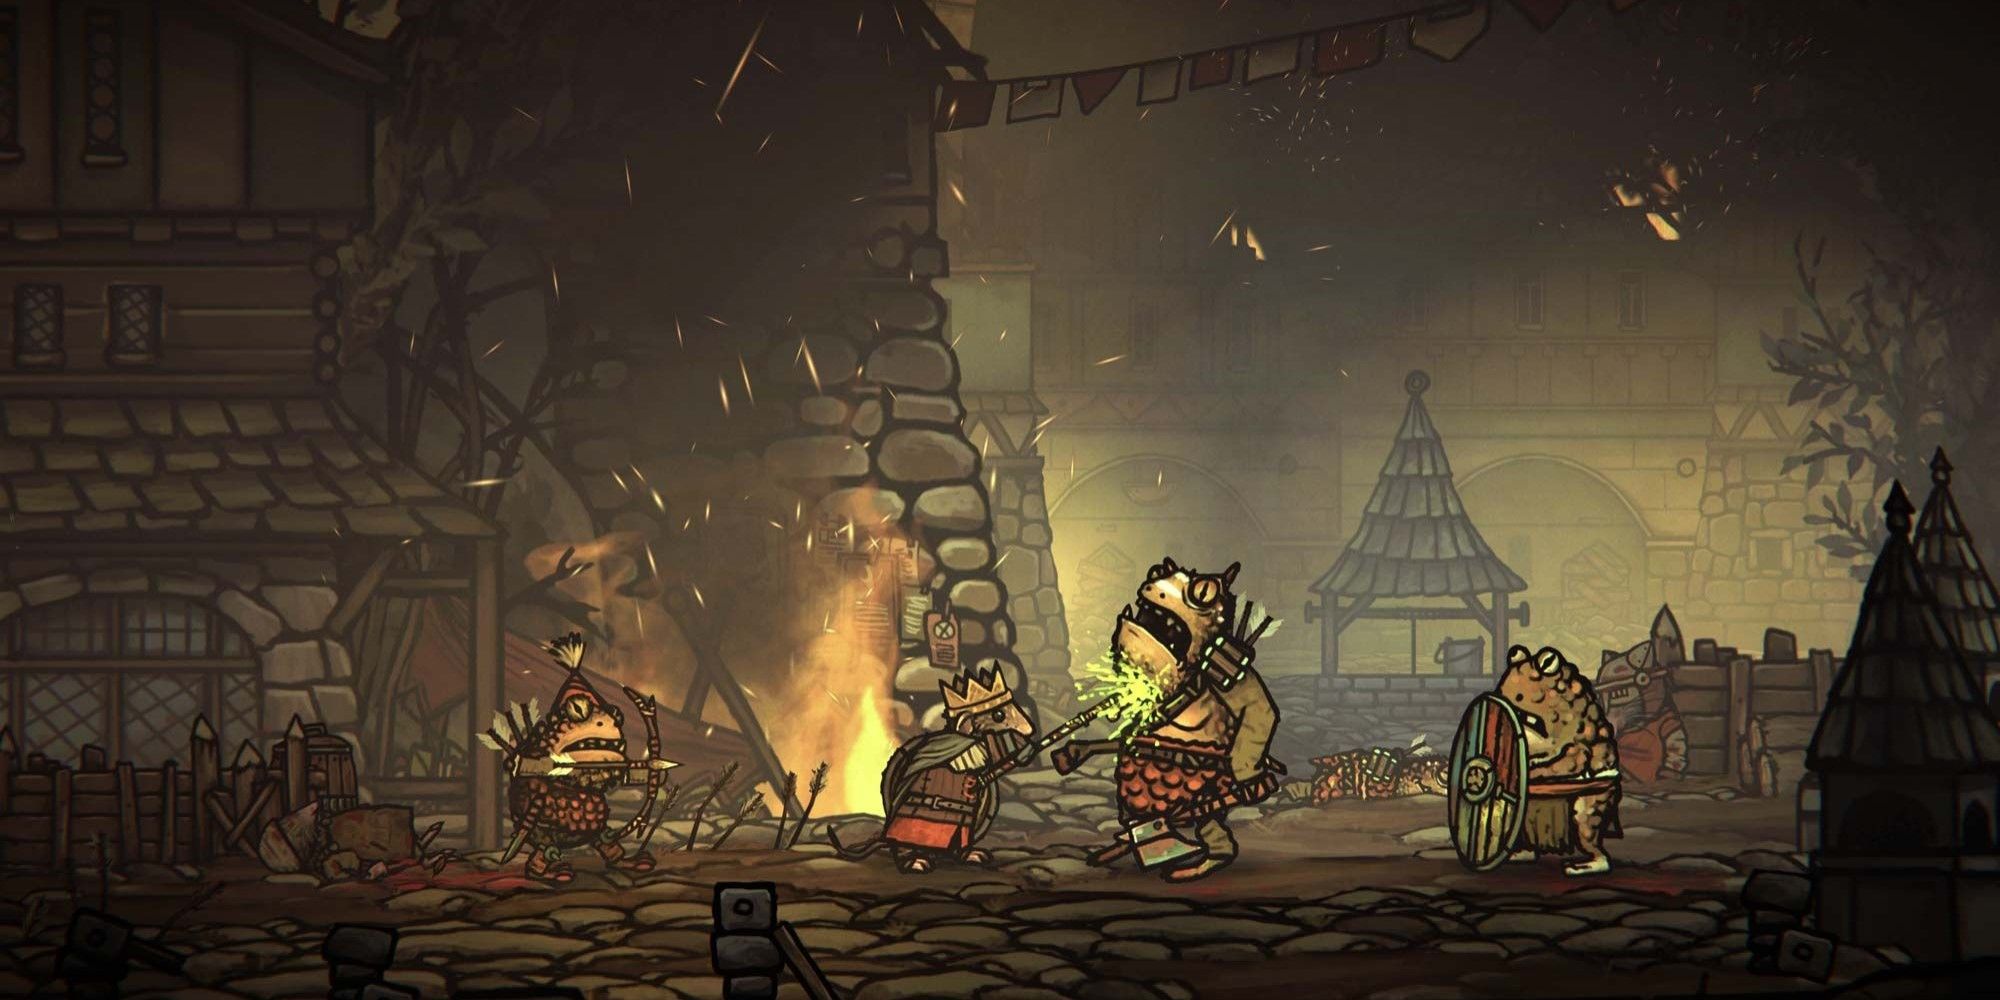 The main player character Redgi stabbing a Frog enemy up the chin with a spear weapon near a fire in Tails of Iron.